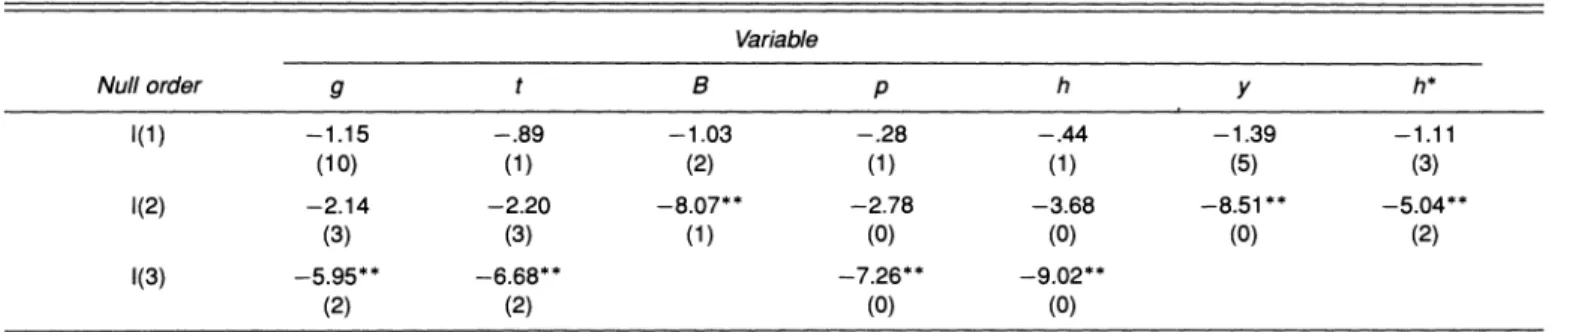 Table 2 summarizes  the cointegration  results. It includes  the eigenvalues, the max and trace statistics, the standard-  ized estimated feedback coefficients a  and cointegrating  vector p', and statistics for testing restrictions on a